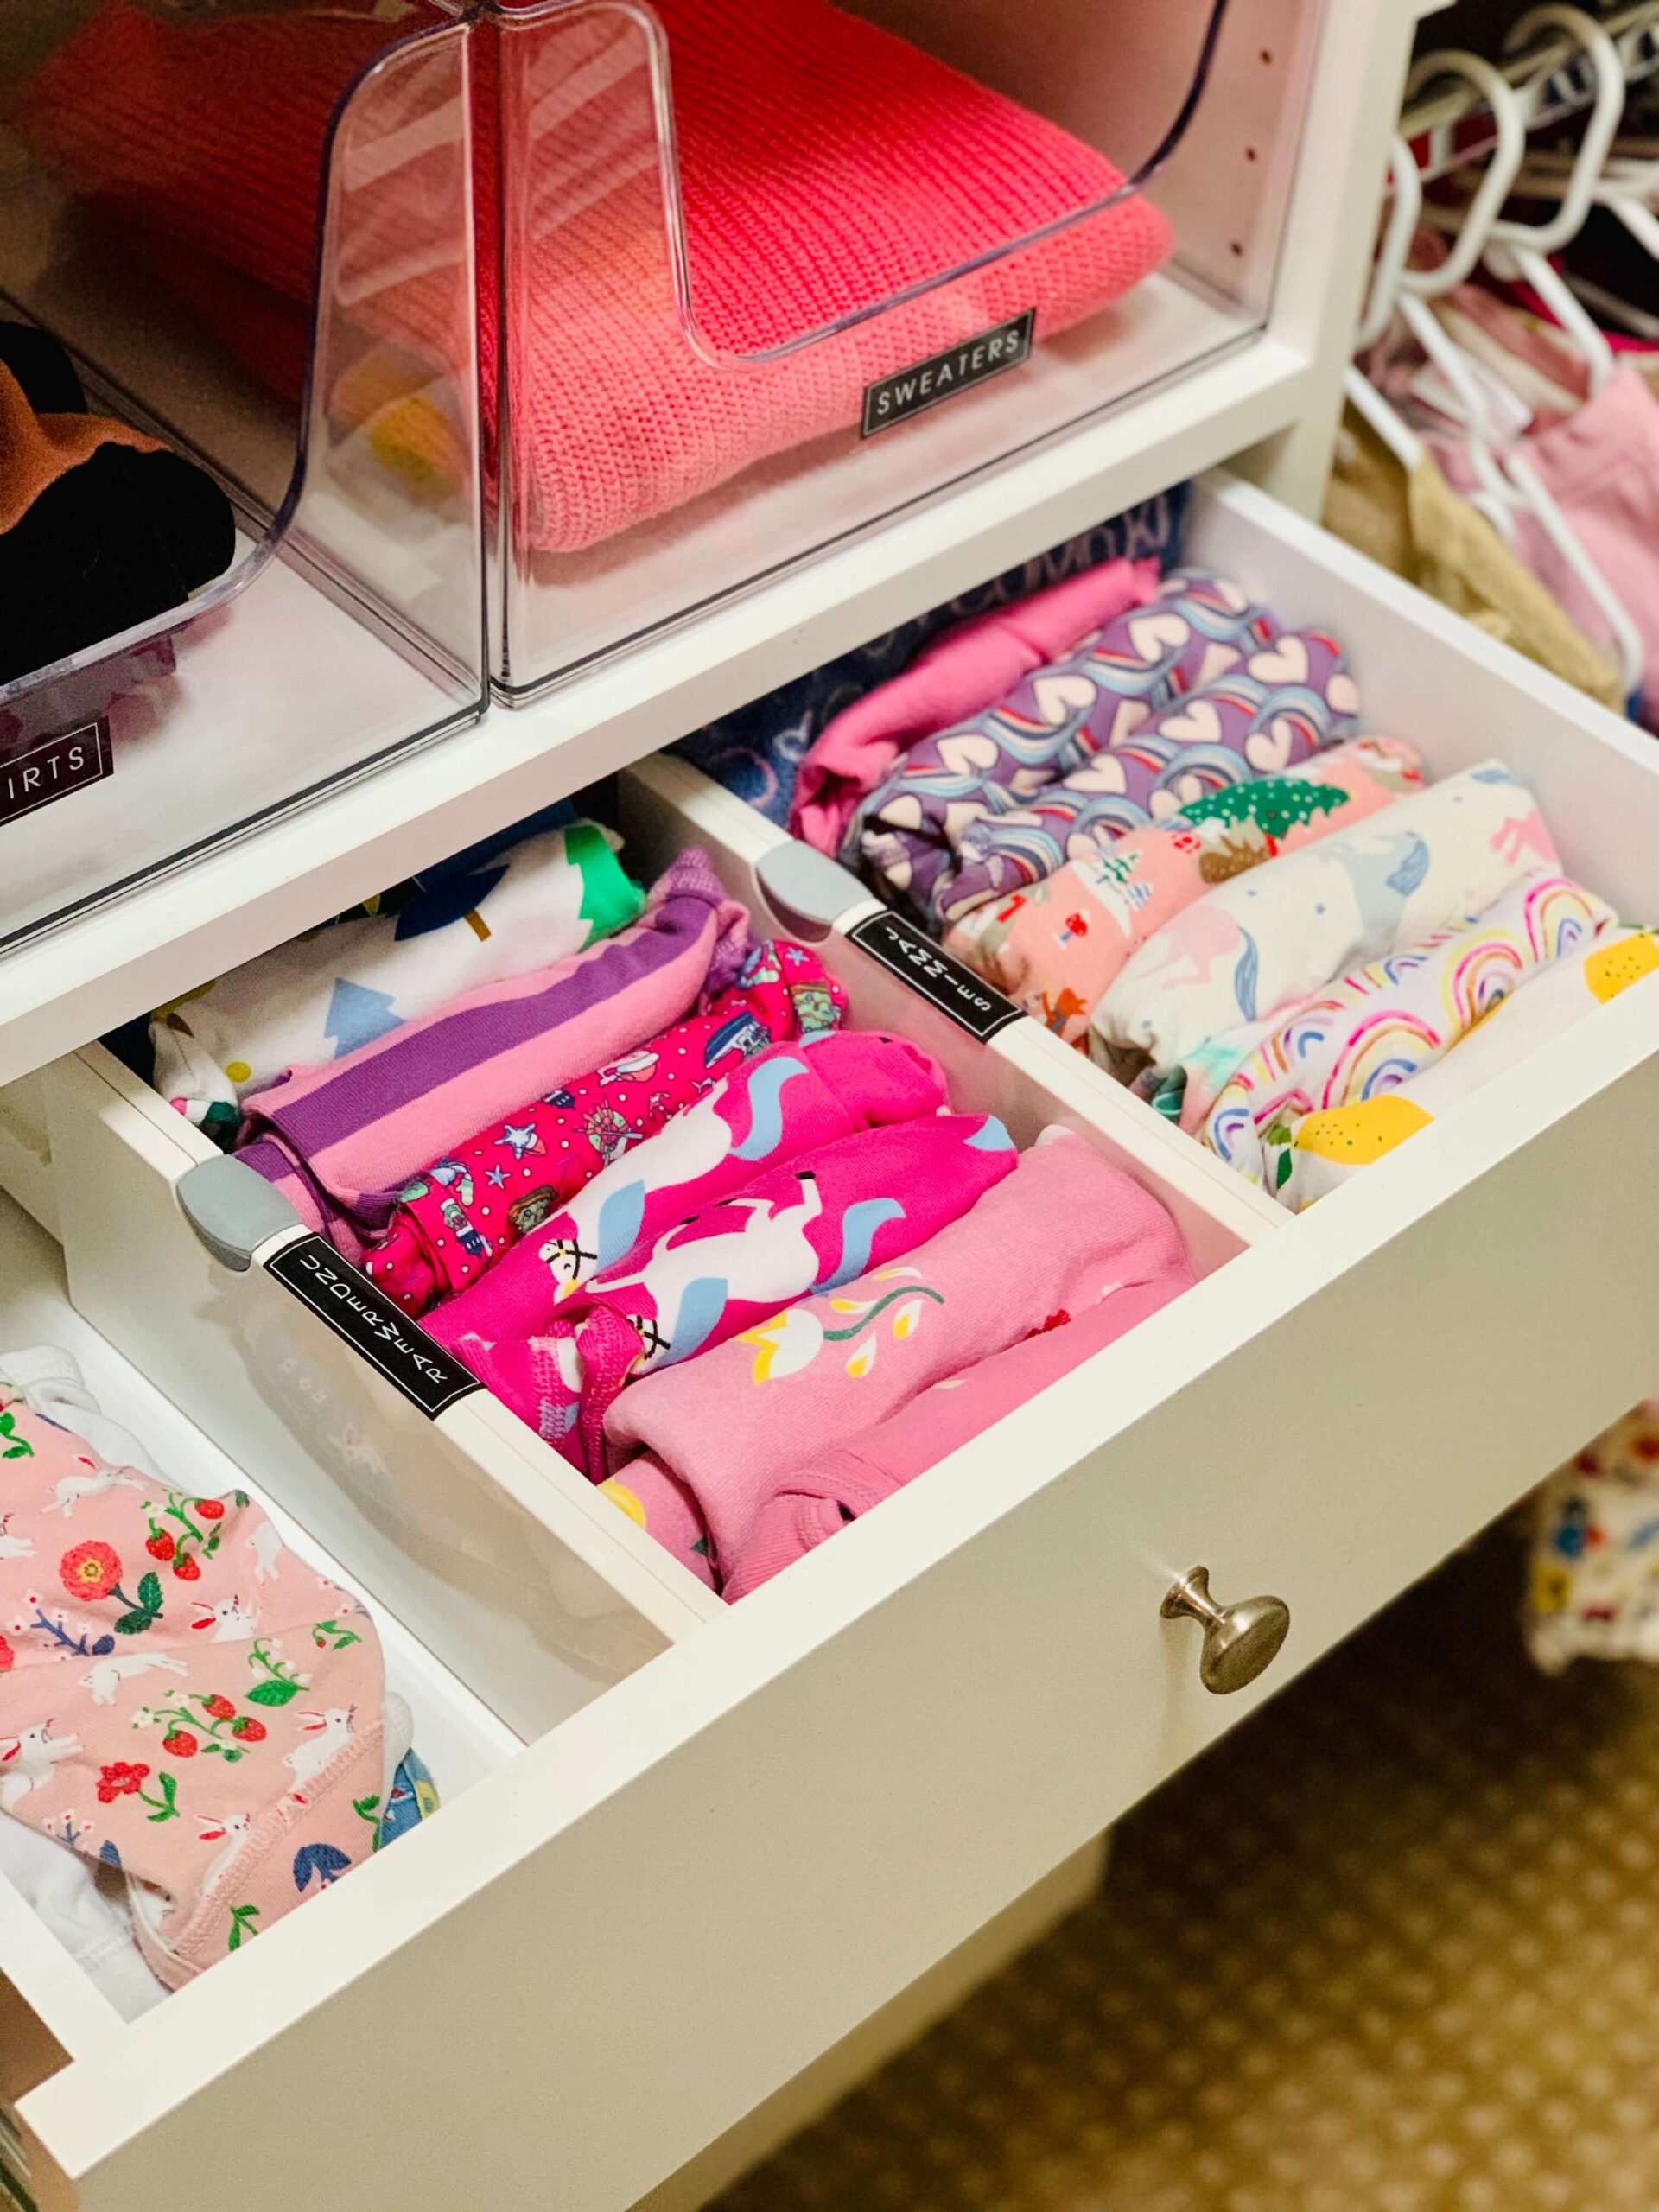 Undergarment Drawer Organizer Available at